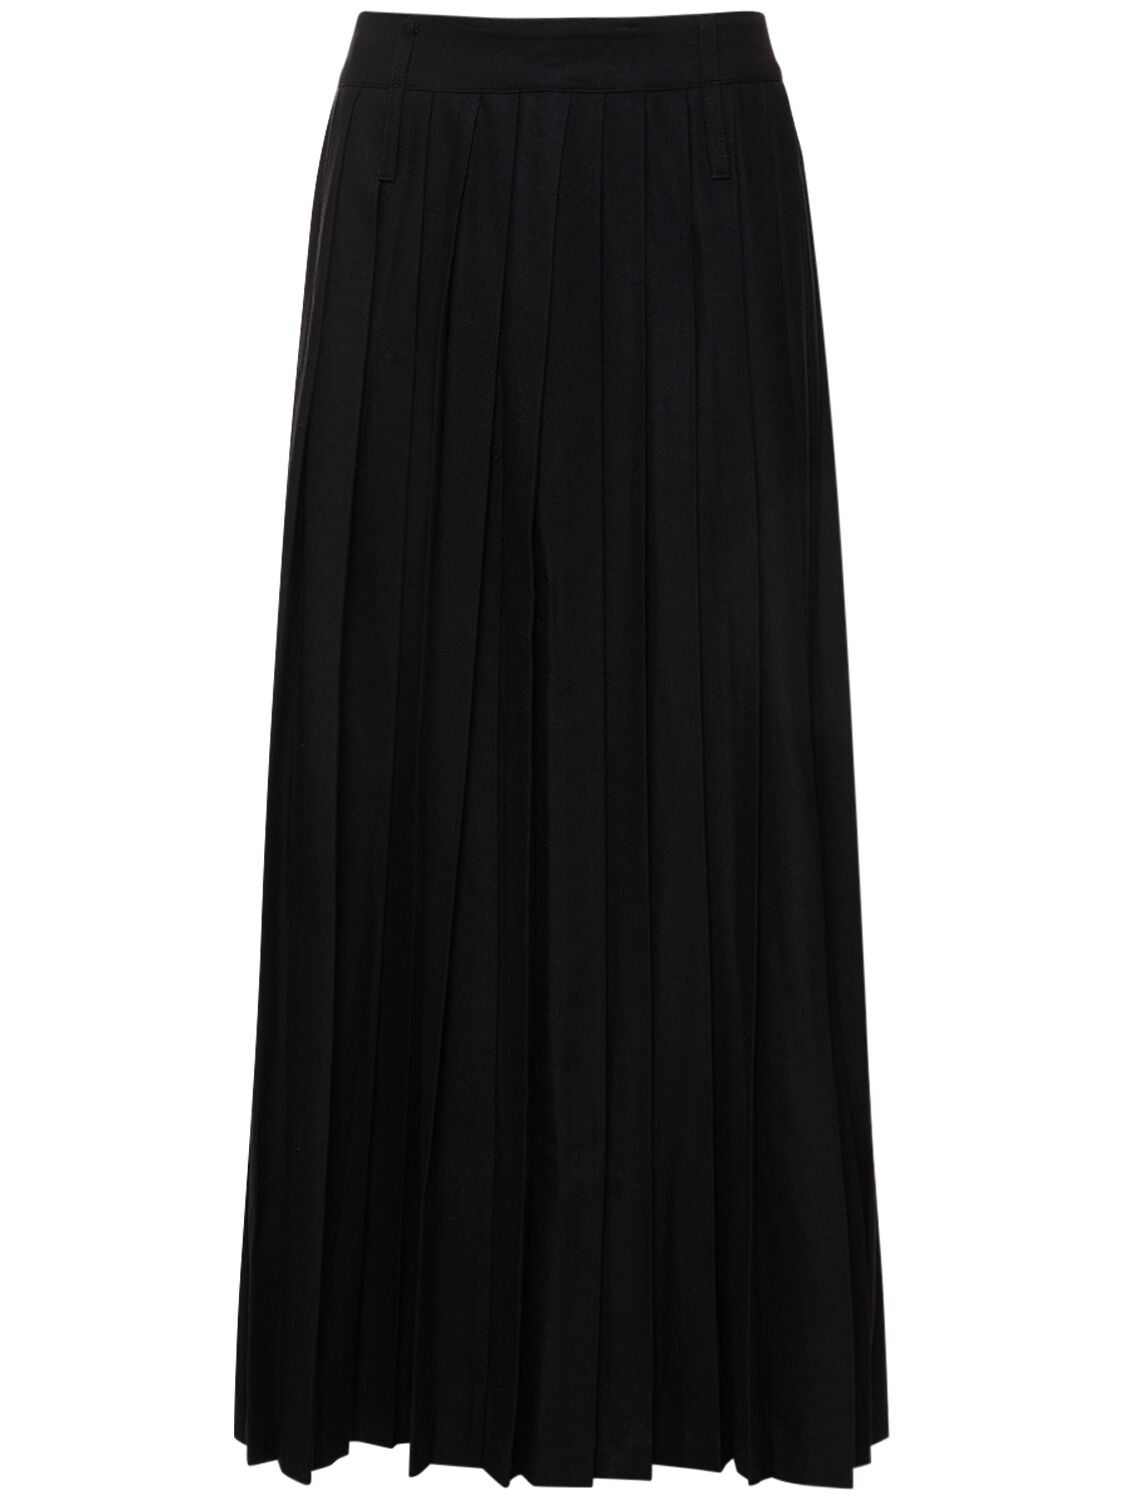 THE FRANKIE SHOP BAILEY LONG PLEATED WOOL BLEND SKIRT